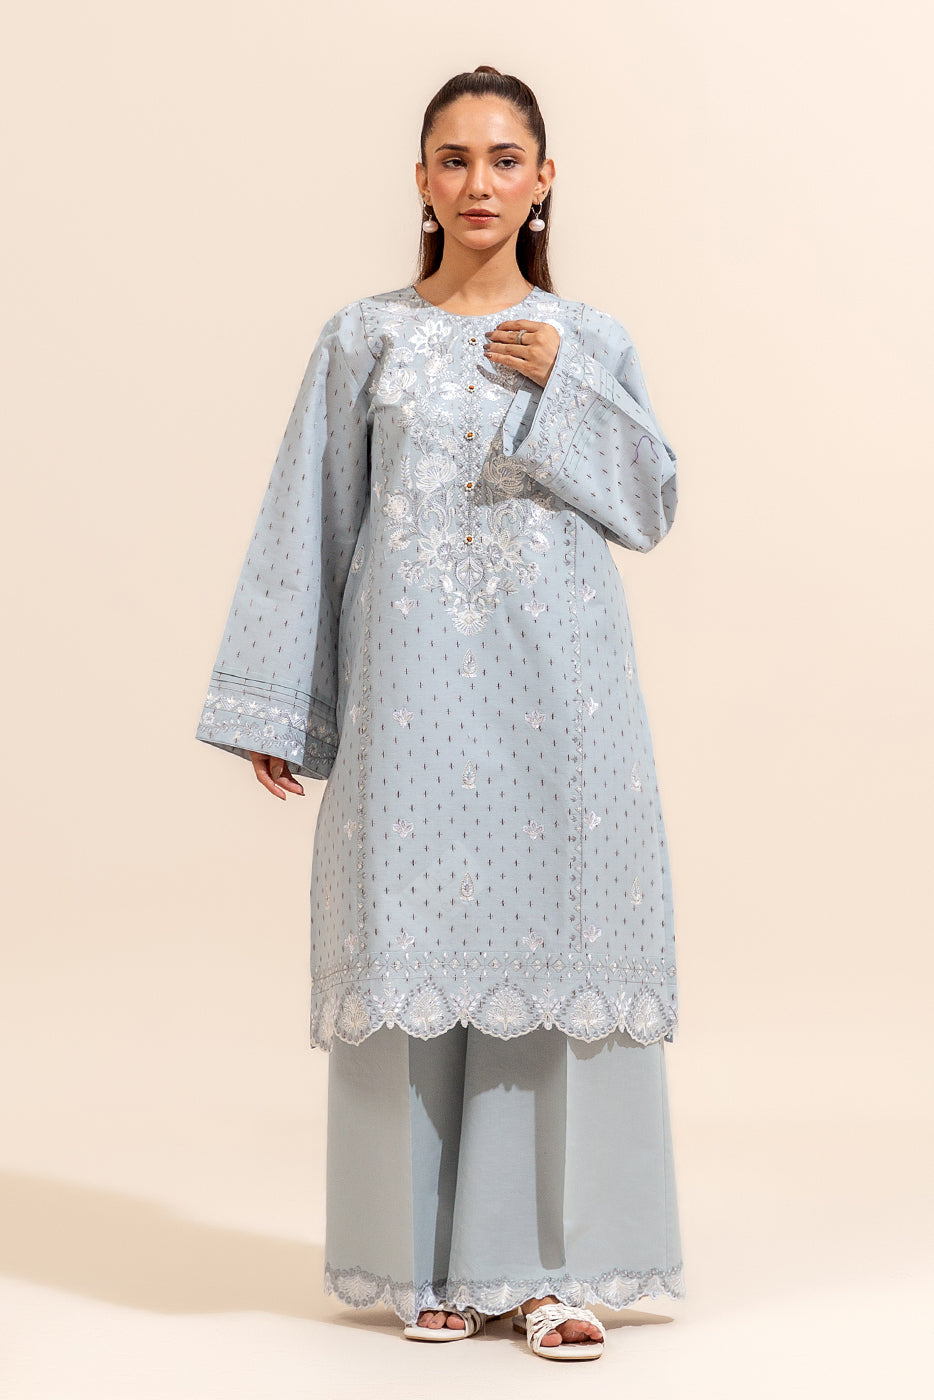 2 PIECE EMBROIDERED JACQUARD SUIT-ICEBERG VINES (UNSTITCHED)